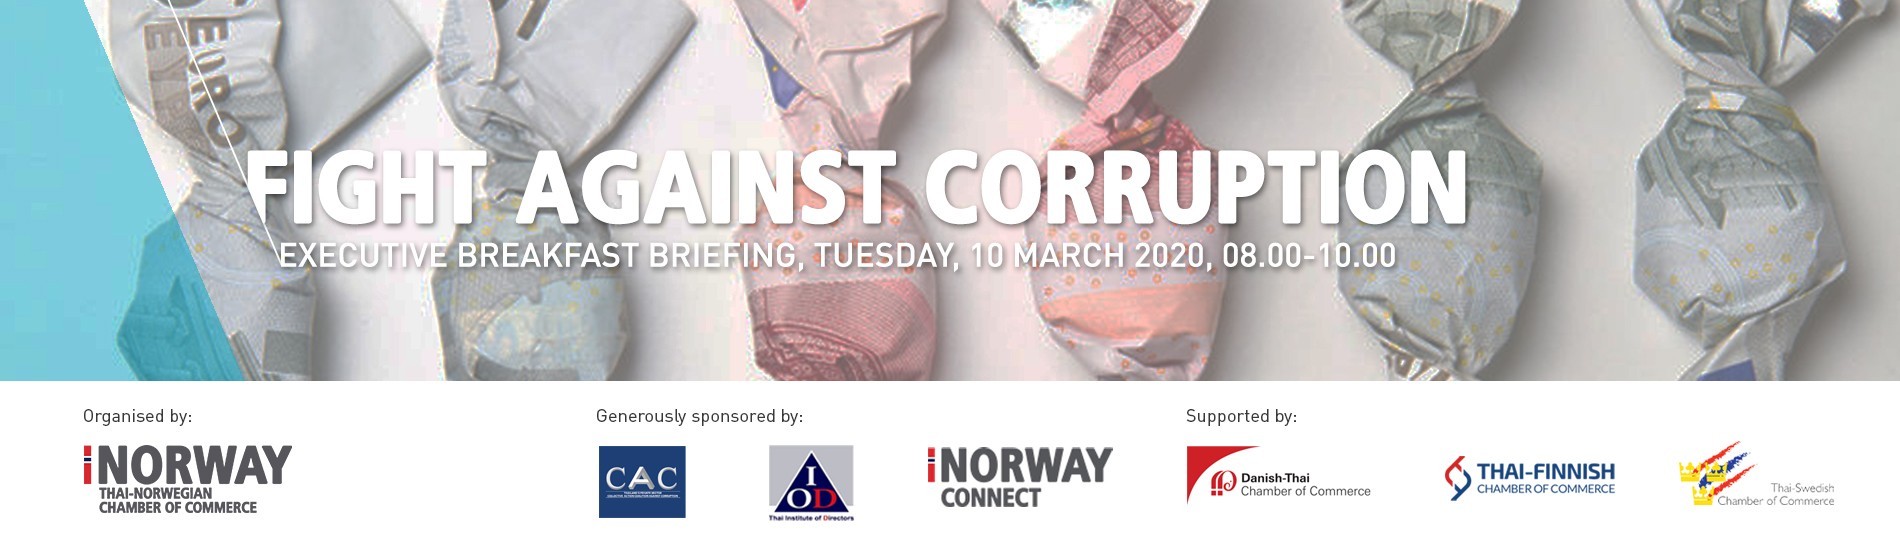 Executive Breakfast Briefing: Fight against Corruption through CAC Certification